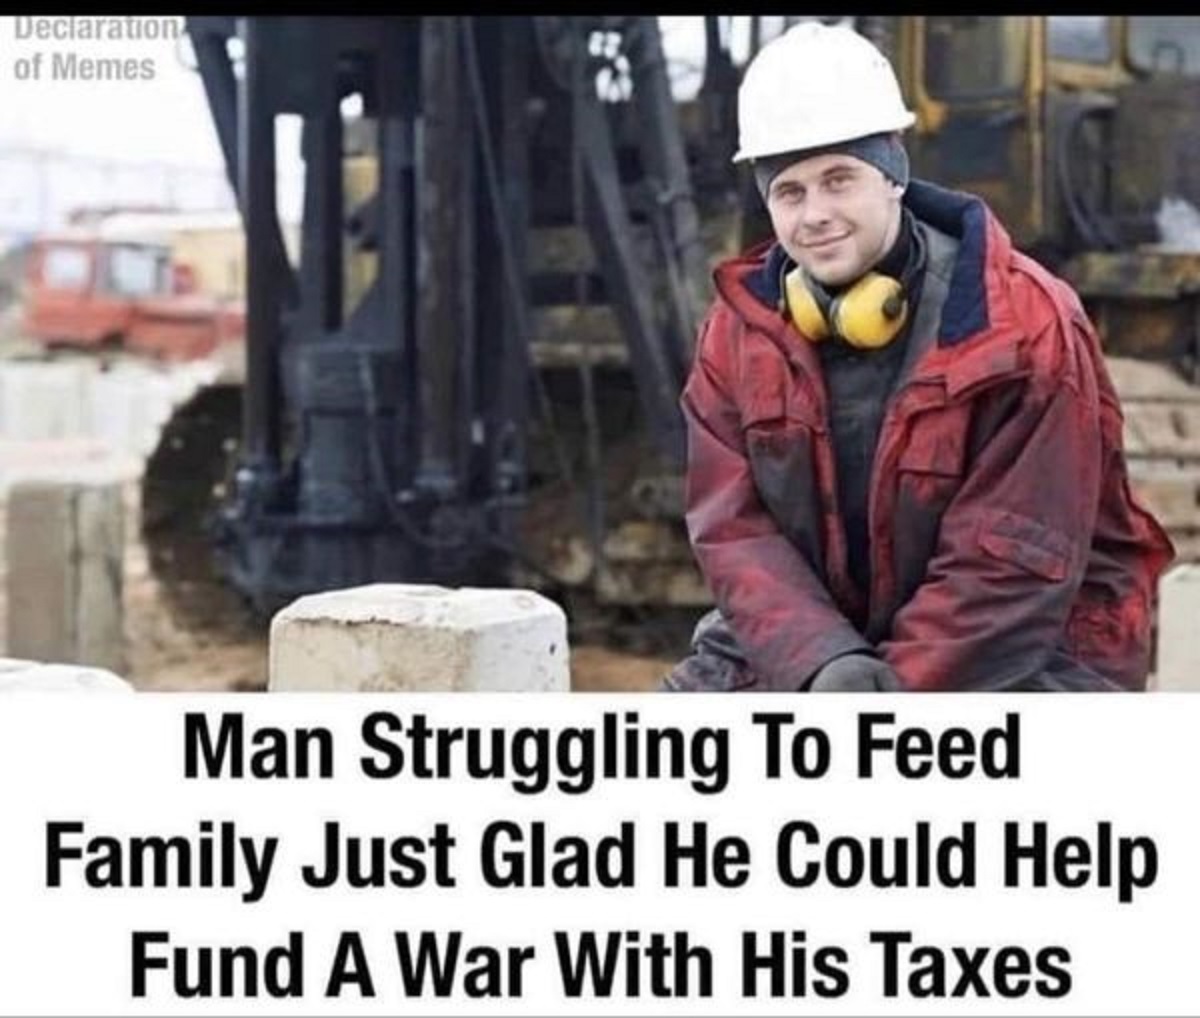 laborer - Declaration of Memes Man Struggling To Feed Family Just Glad He Could Help Fund A War With His Taxes